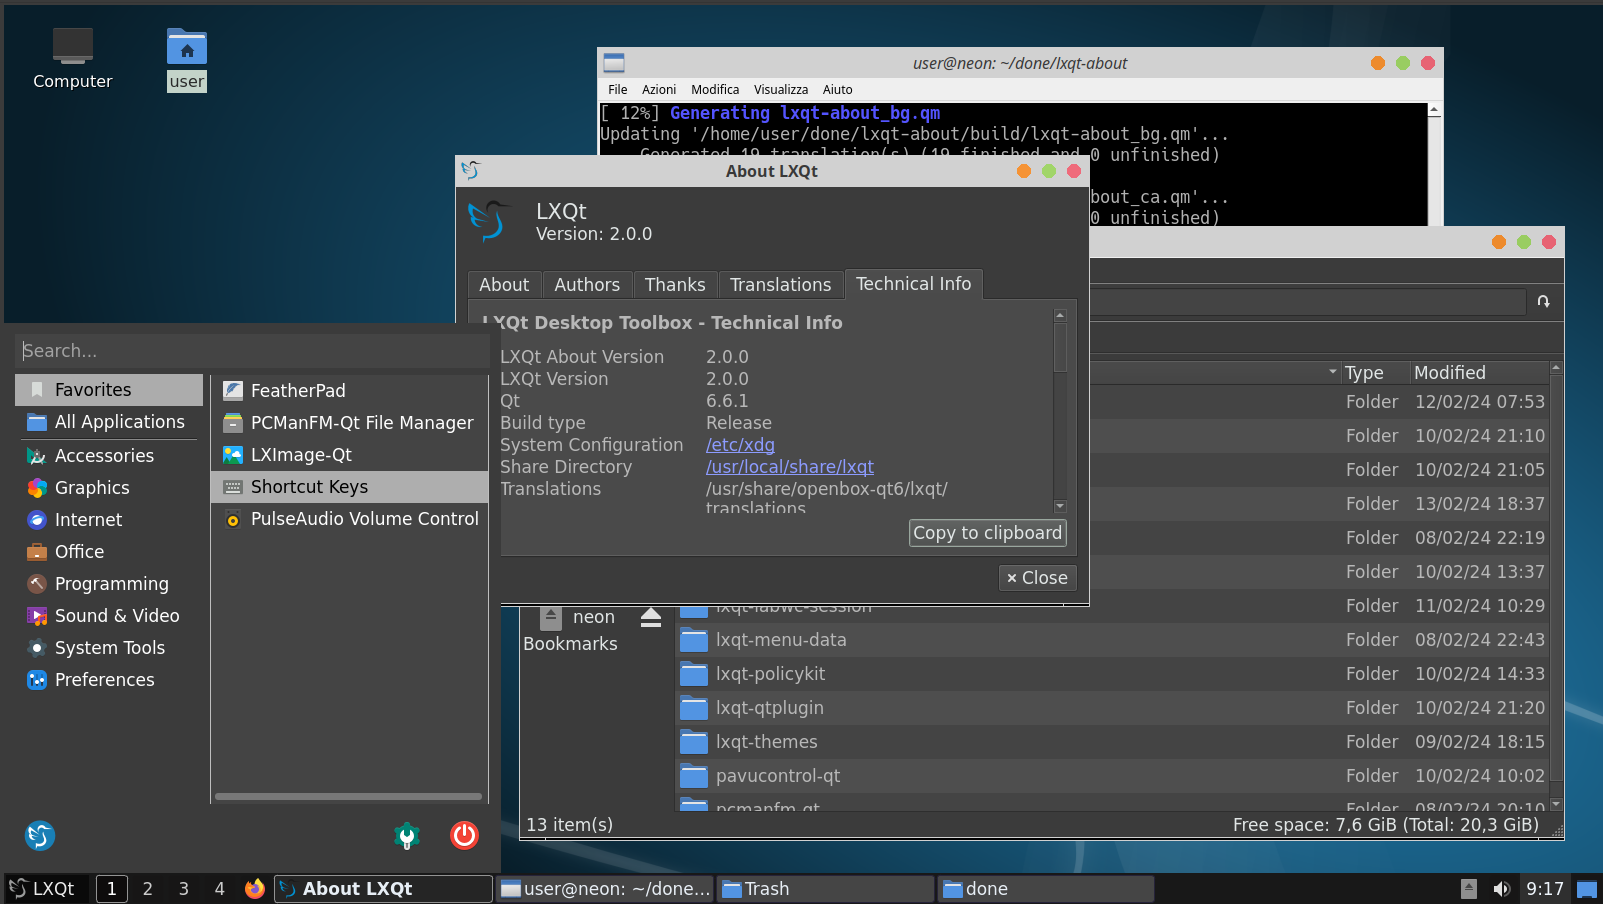 KDE Plasma 6 Released, Tails 6, LXQt on Qt6, and more!